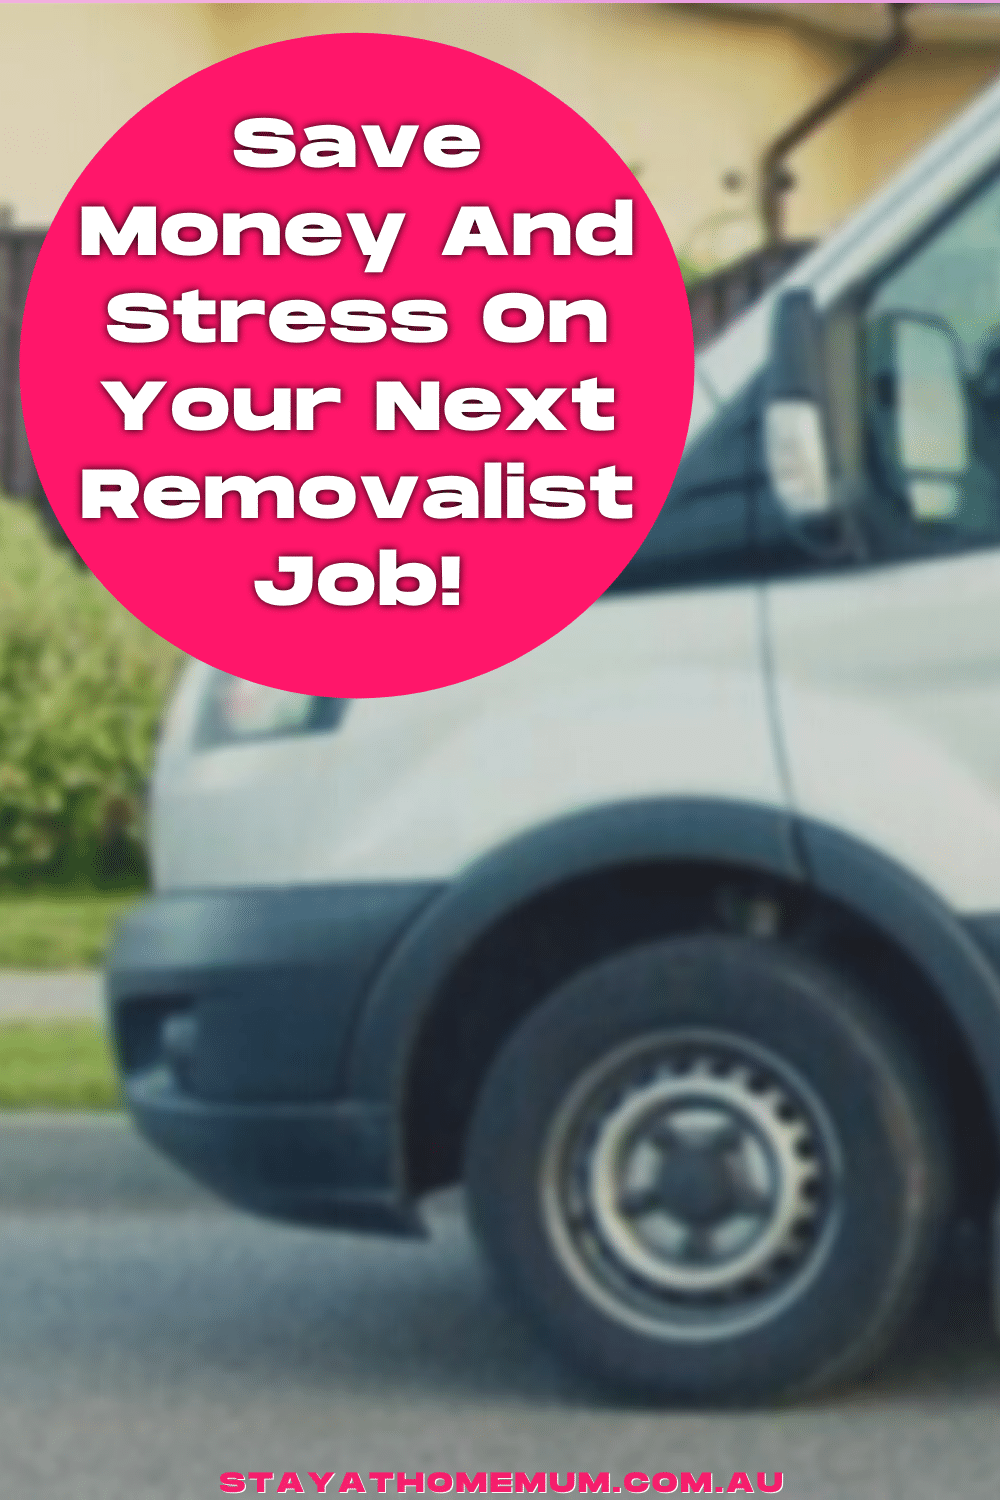 Save Money And Stress On Your Next Removalist Job | Stay At Home Mum